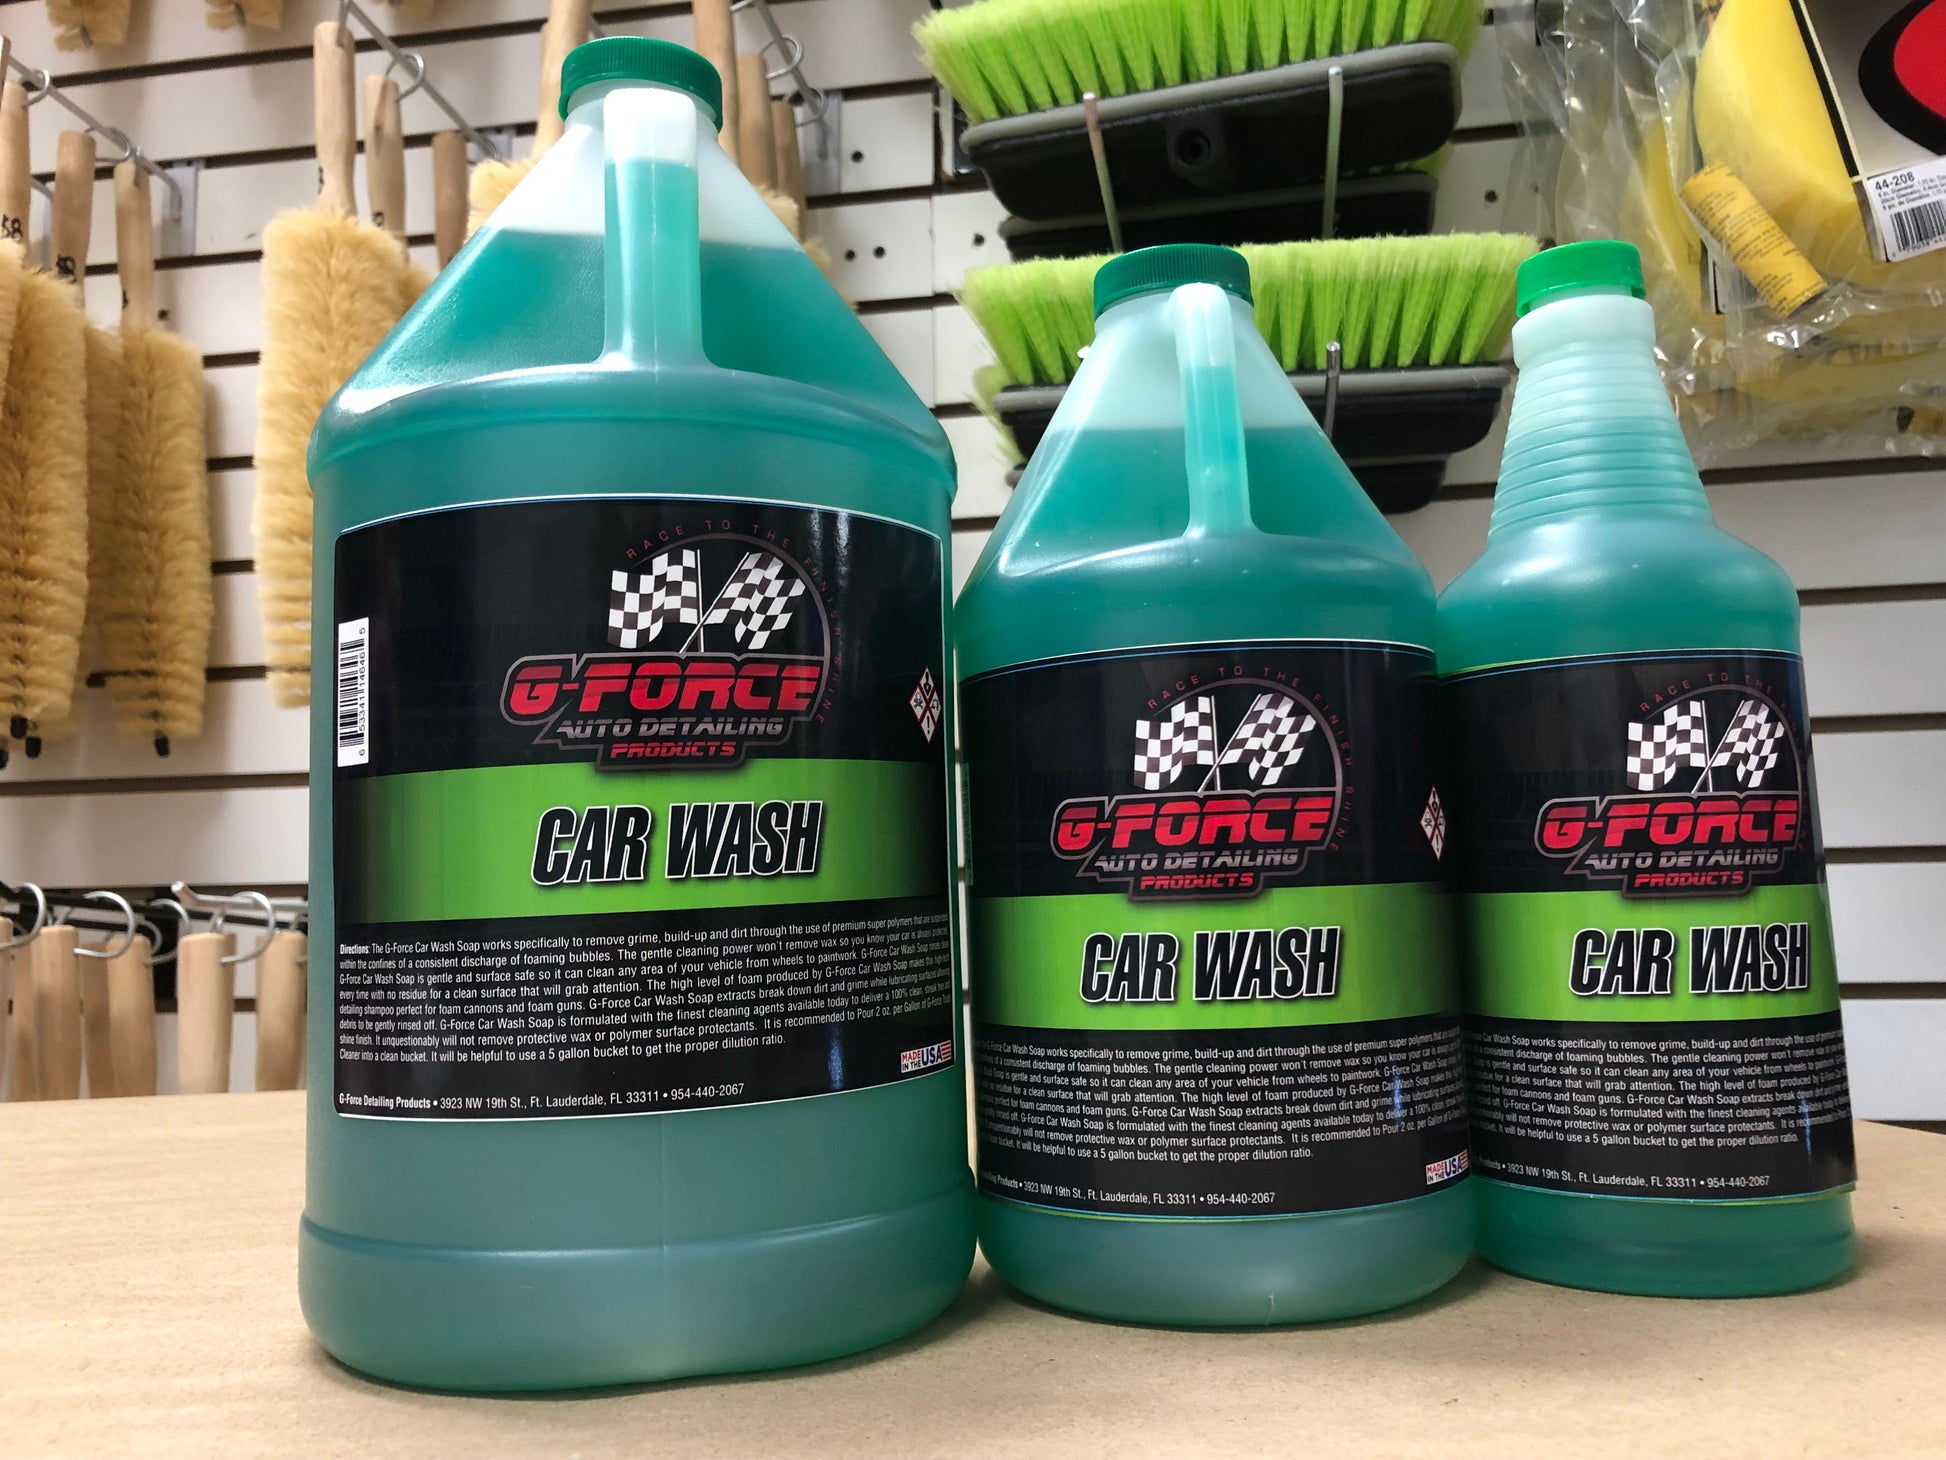 Colored Foam Soap – G Force Auto Detailing Products